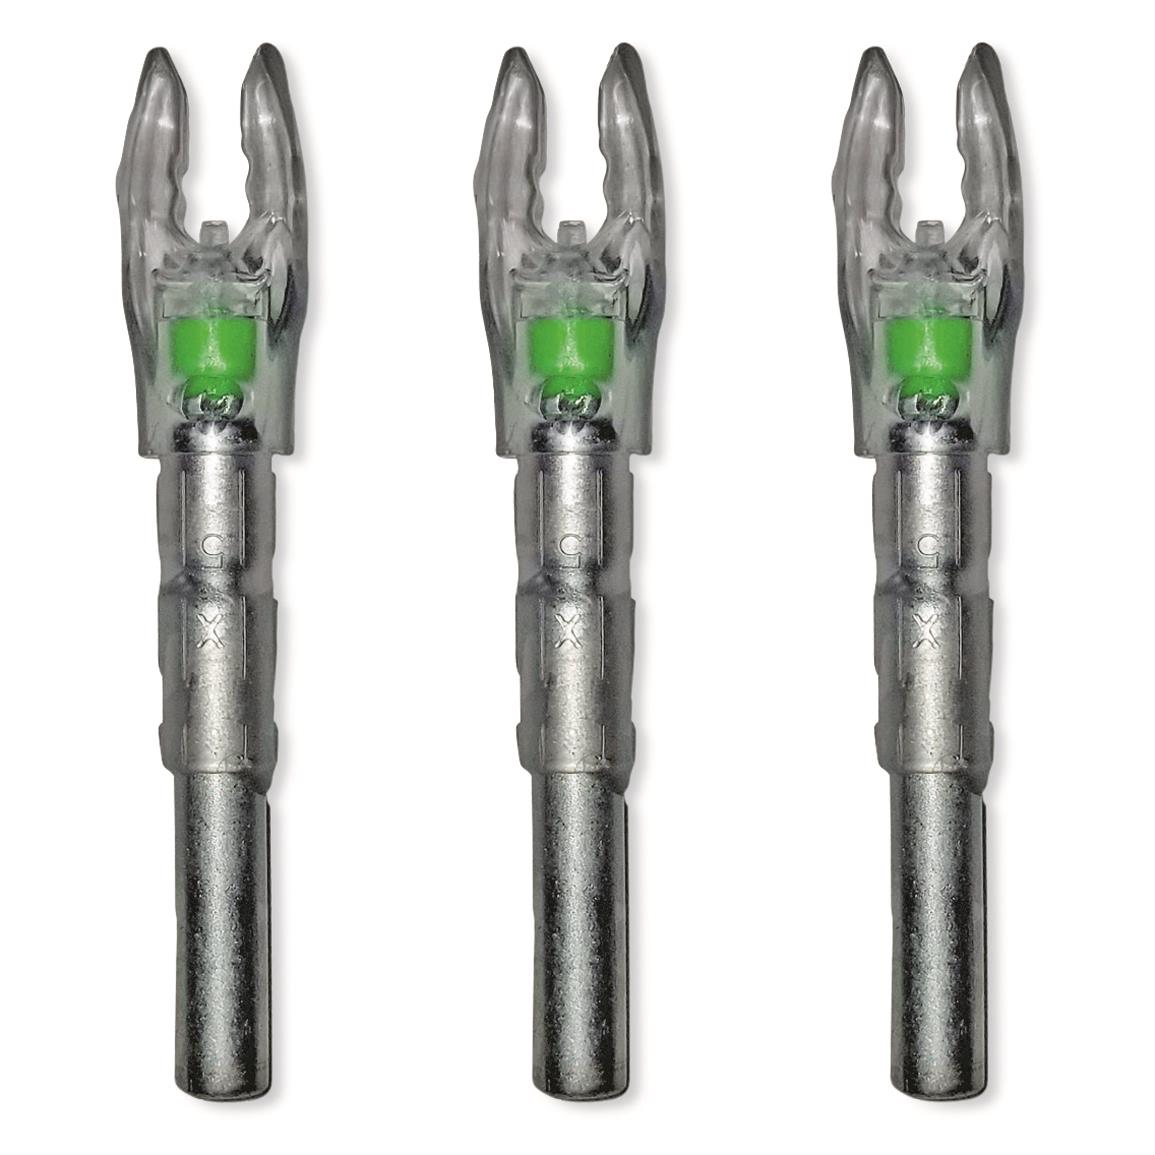 Muzzy Green Lighted Nocks for Carbon Composite Fish Arrows, 3 Pack -  733872, Bowfishing at Sportsman's Guide